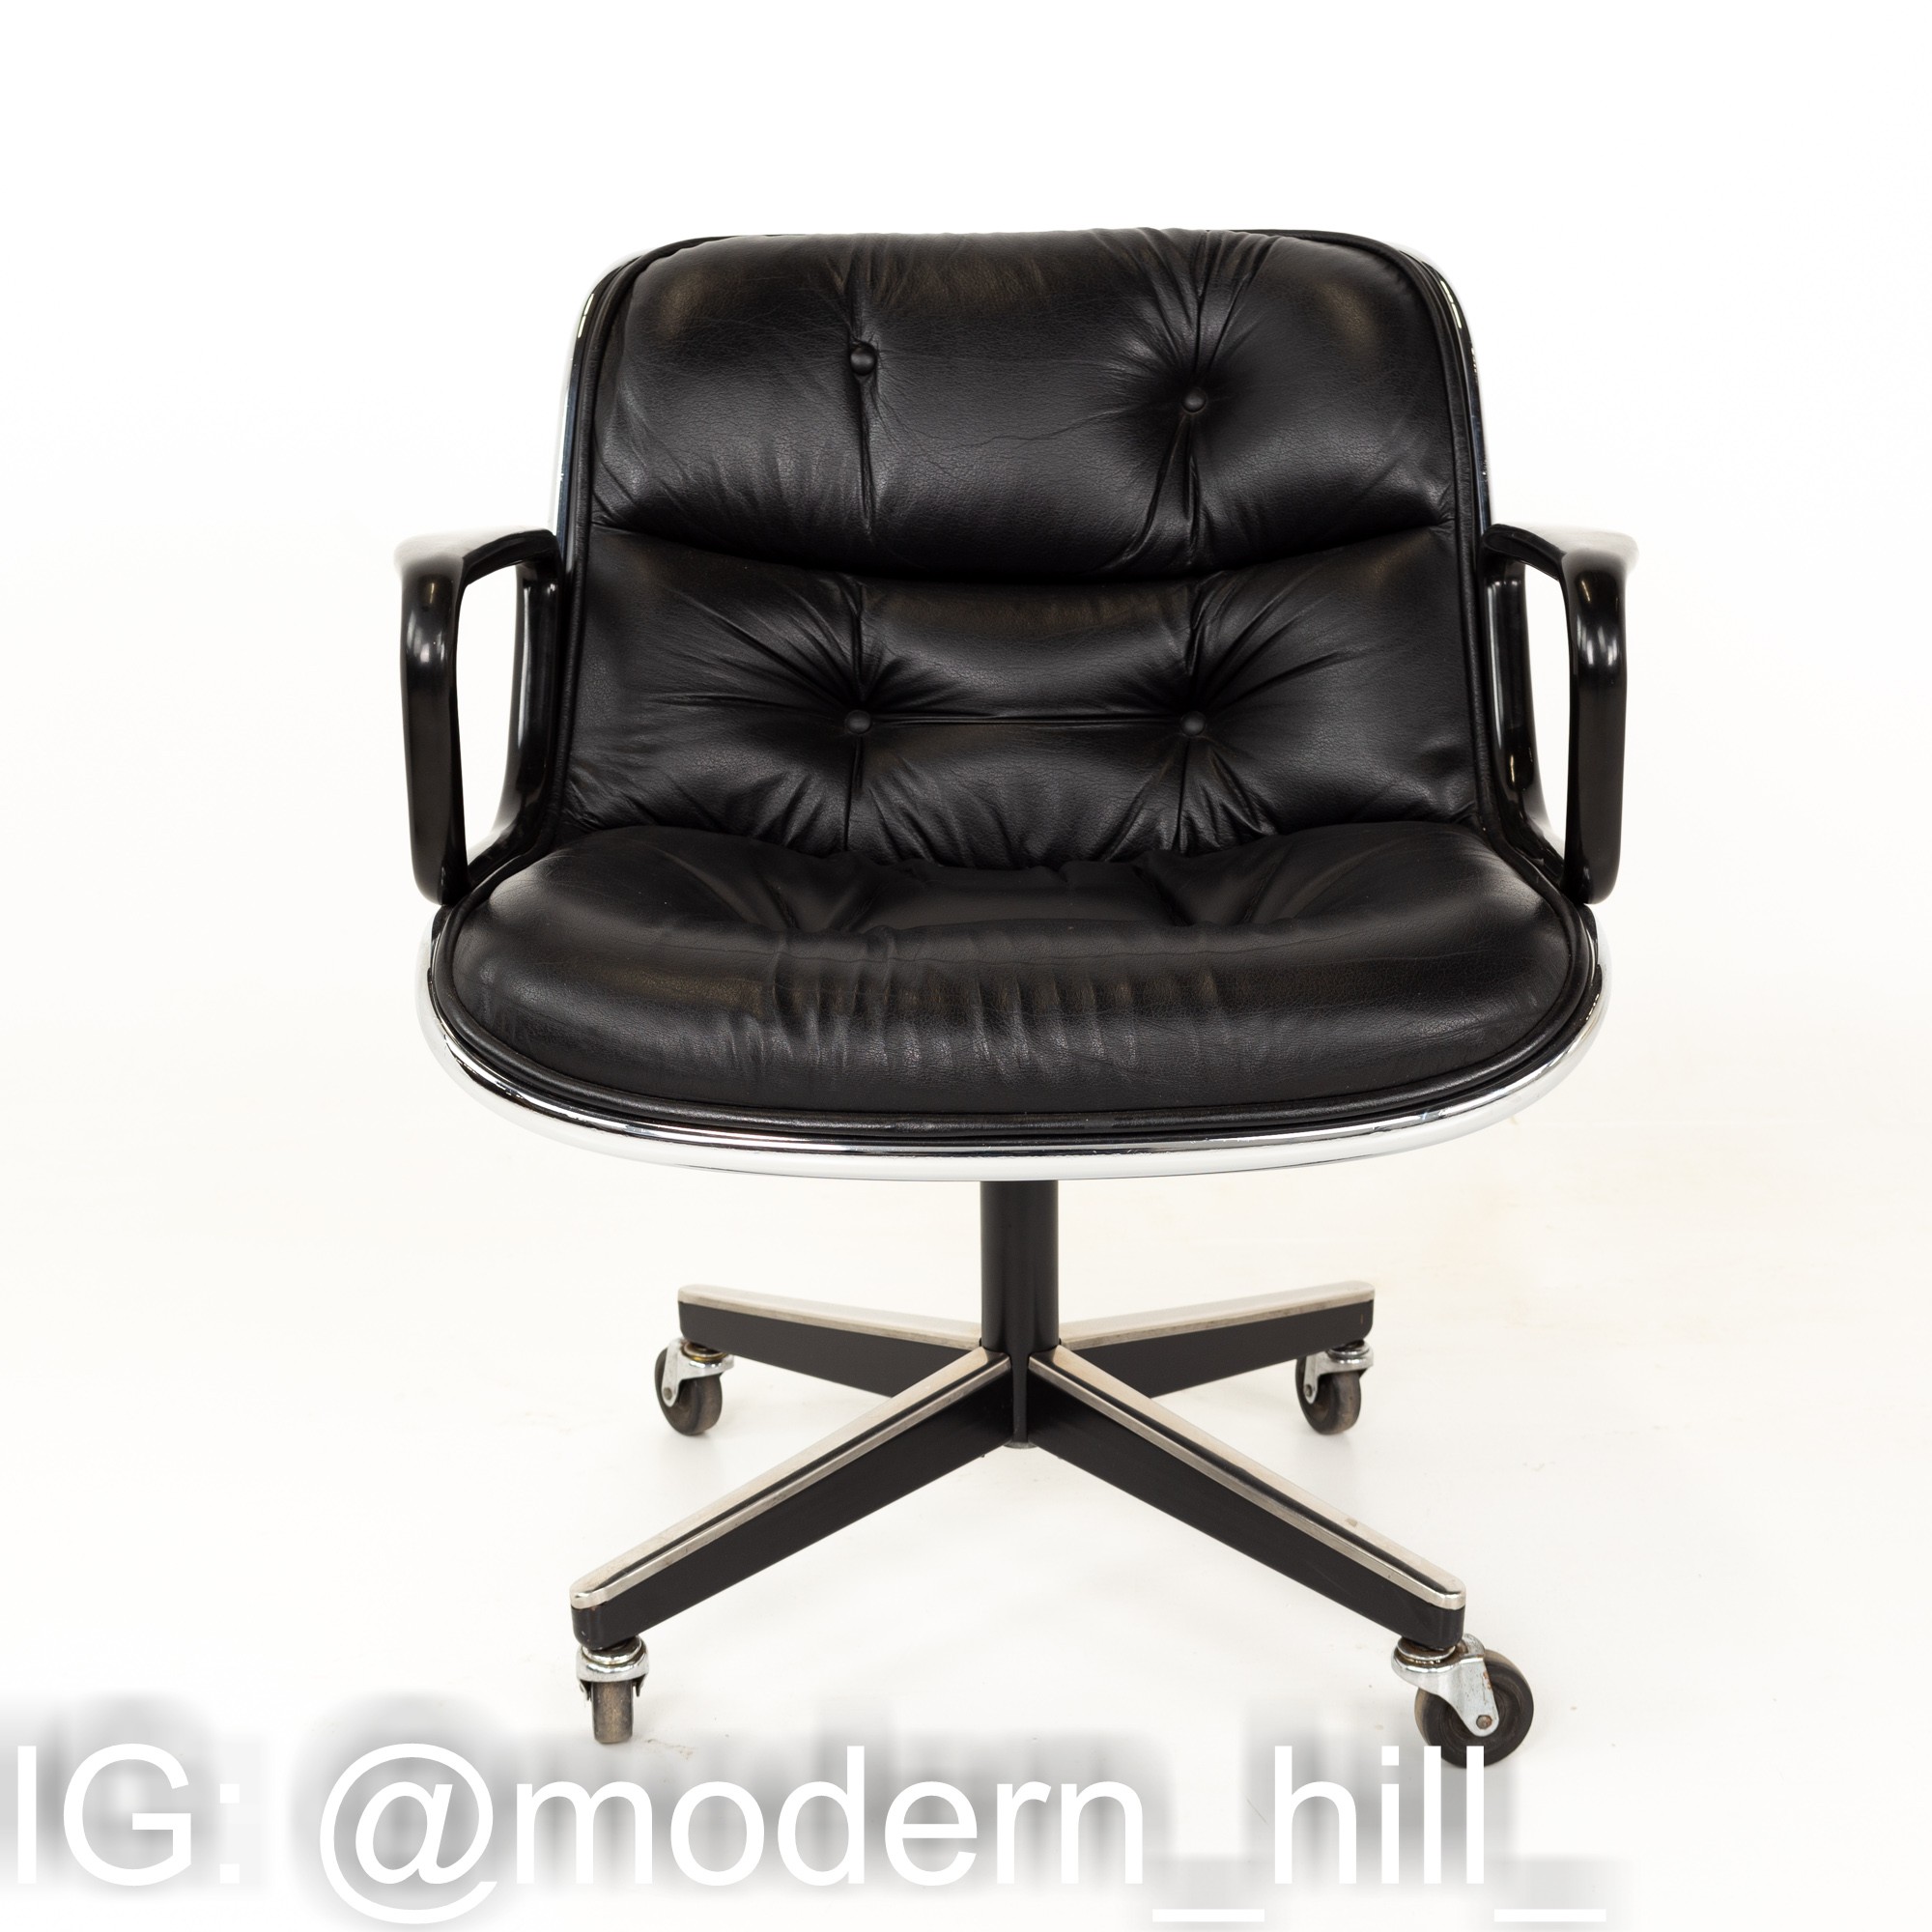 Charles Pollock for Knoll Mid Century Wheeled Office Desk Chair